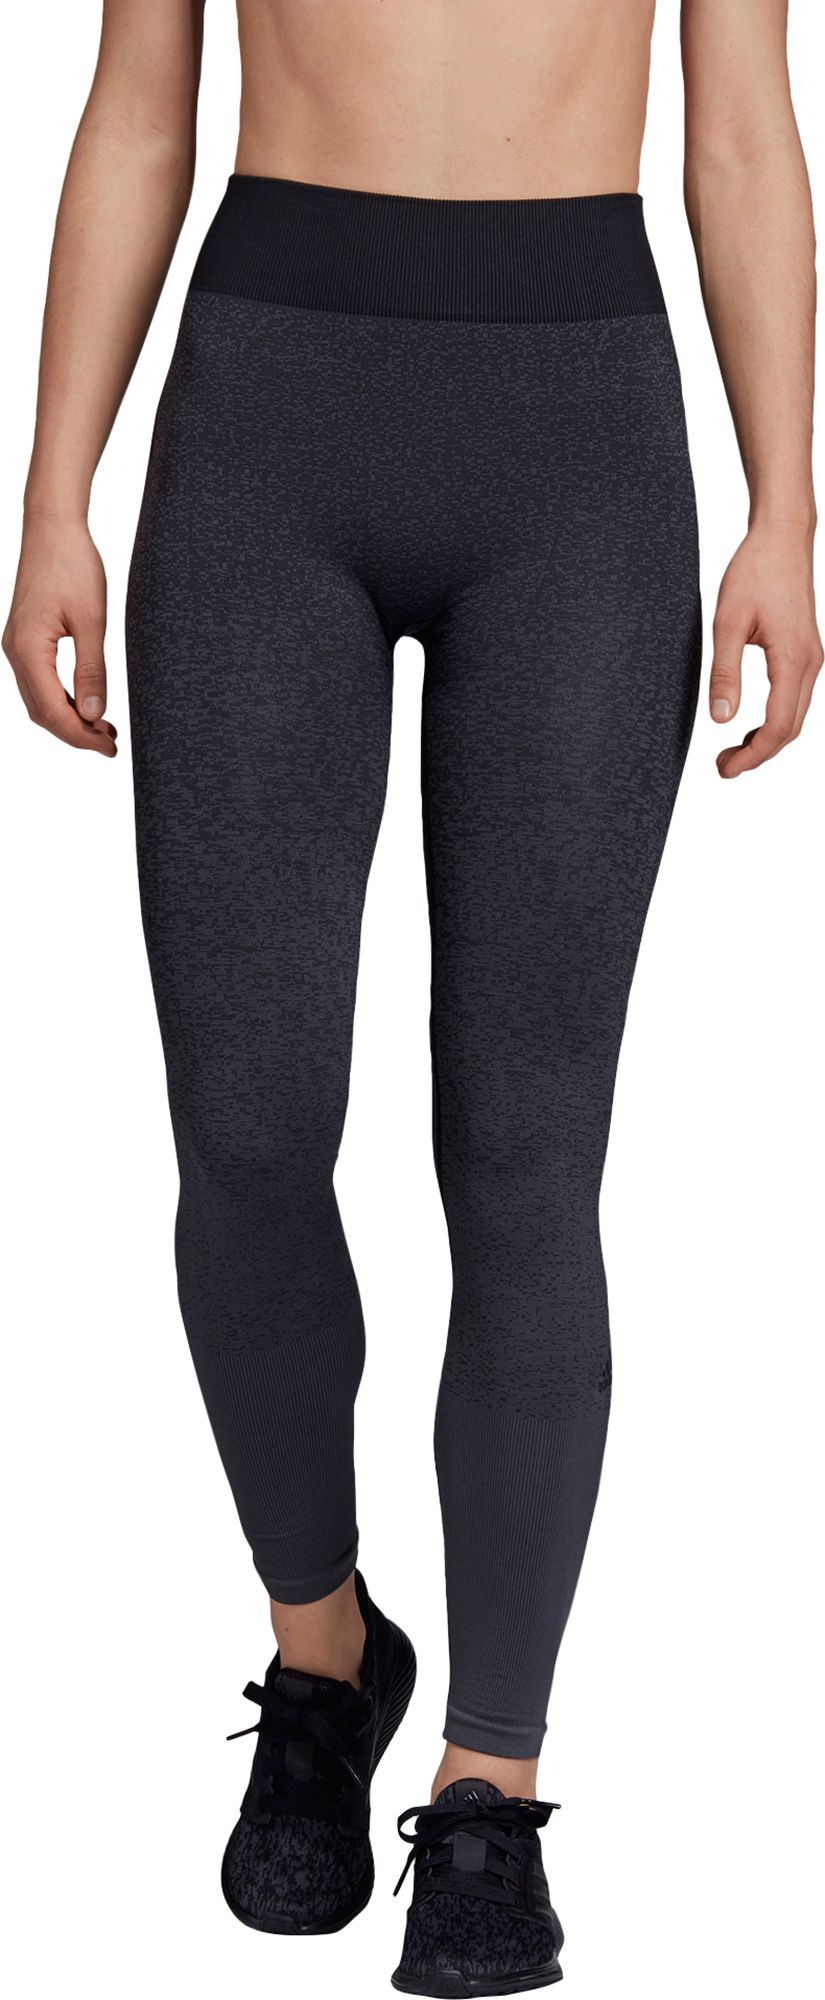 believe this primeknit flw tights